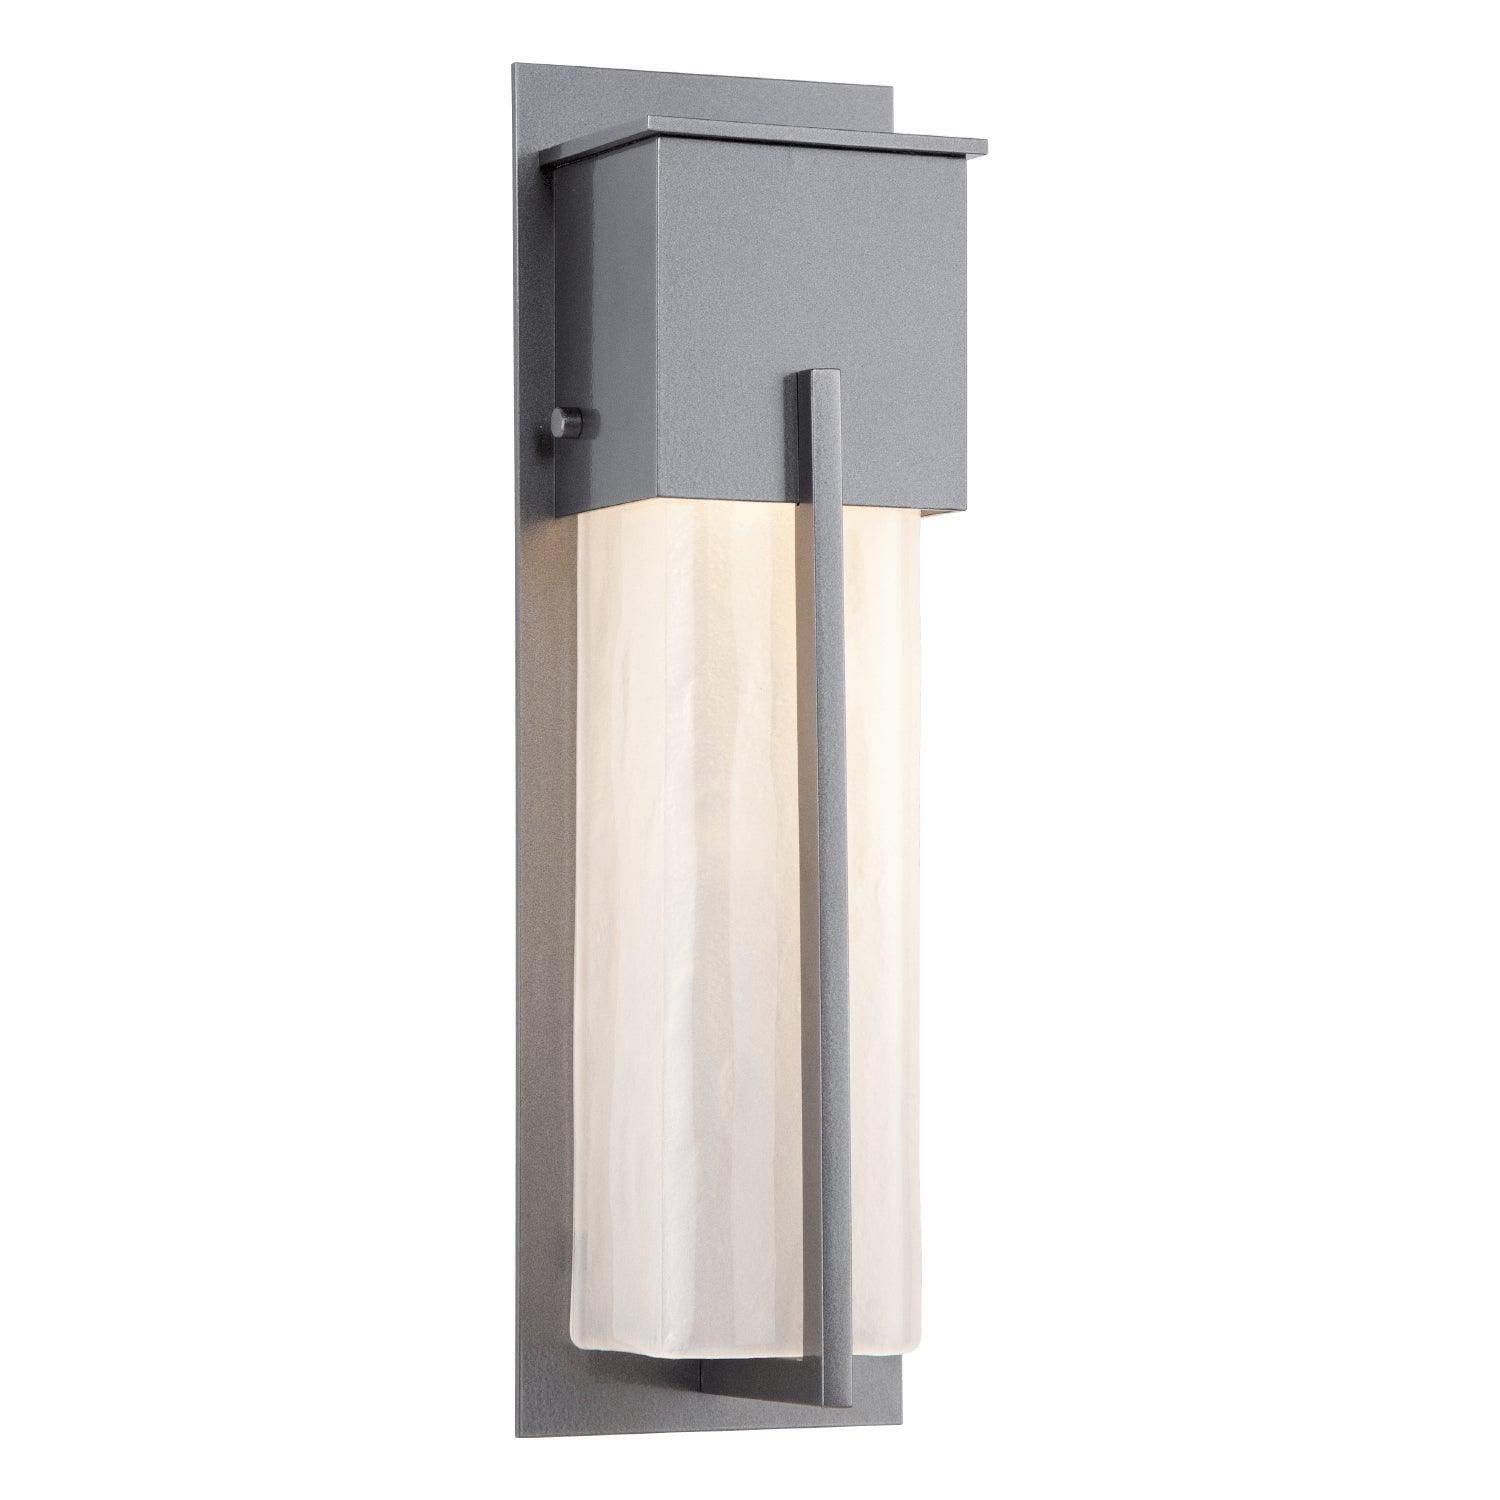 Hammerton Studio - Outdoor Short Square Cover Sconce with Metalwork - ODB0055-16-AG-FG-L2 | Montreal Lighting & Hardware